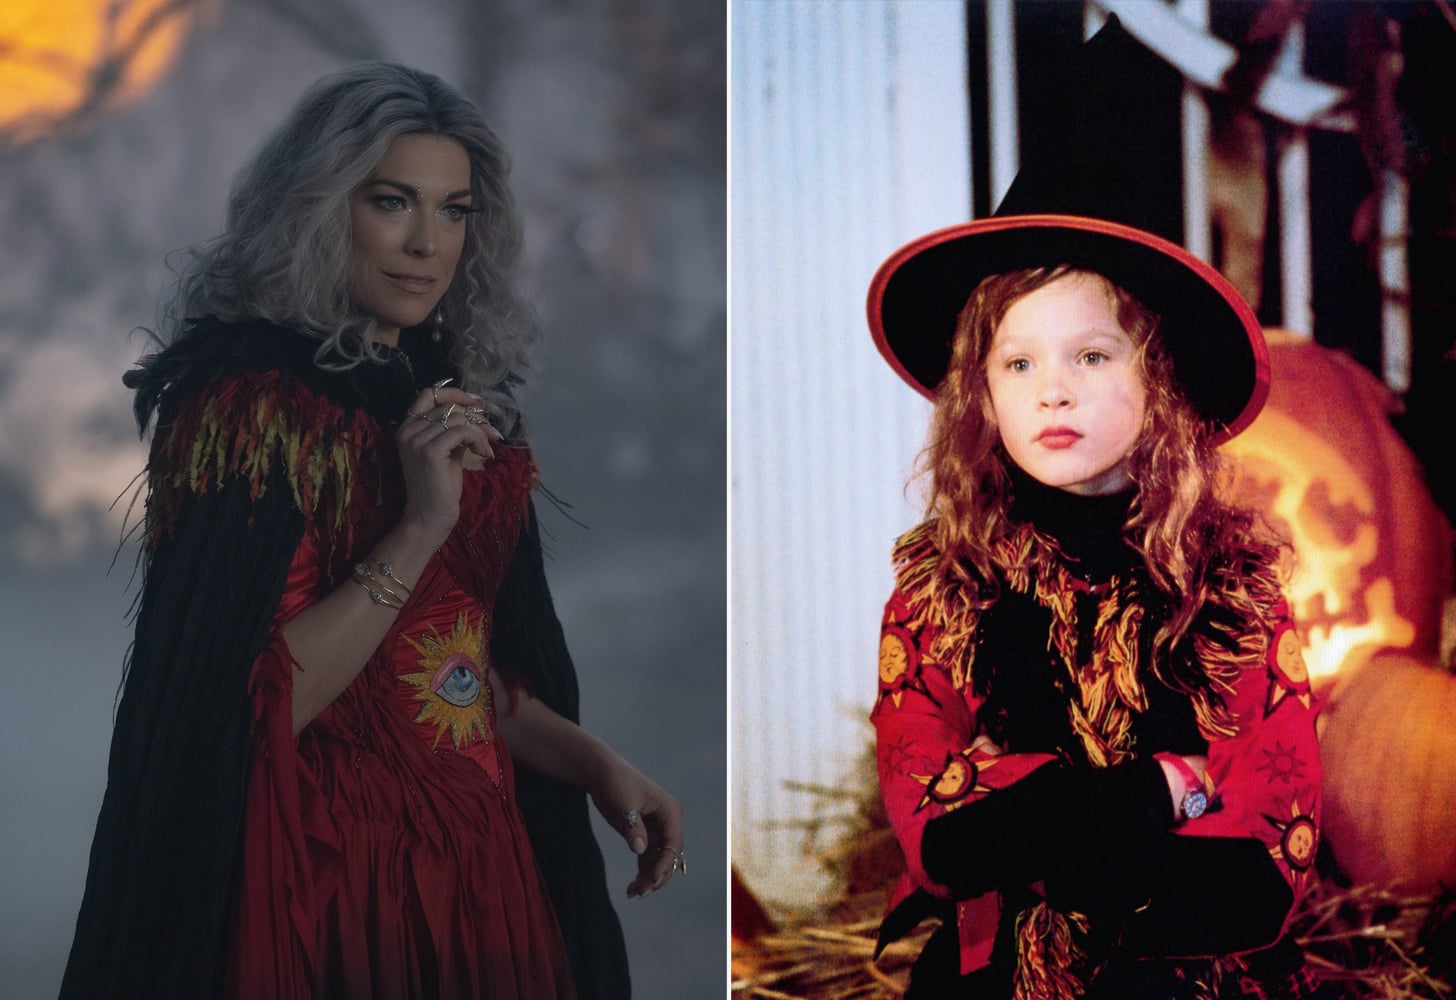 At left: Hannah Waddingham as Mother Witch in "Hocus Pocus 2." At right: Thora Birch as Dani Dennison in "Hocus Pocus."